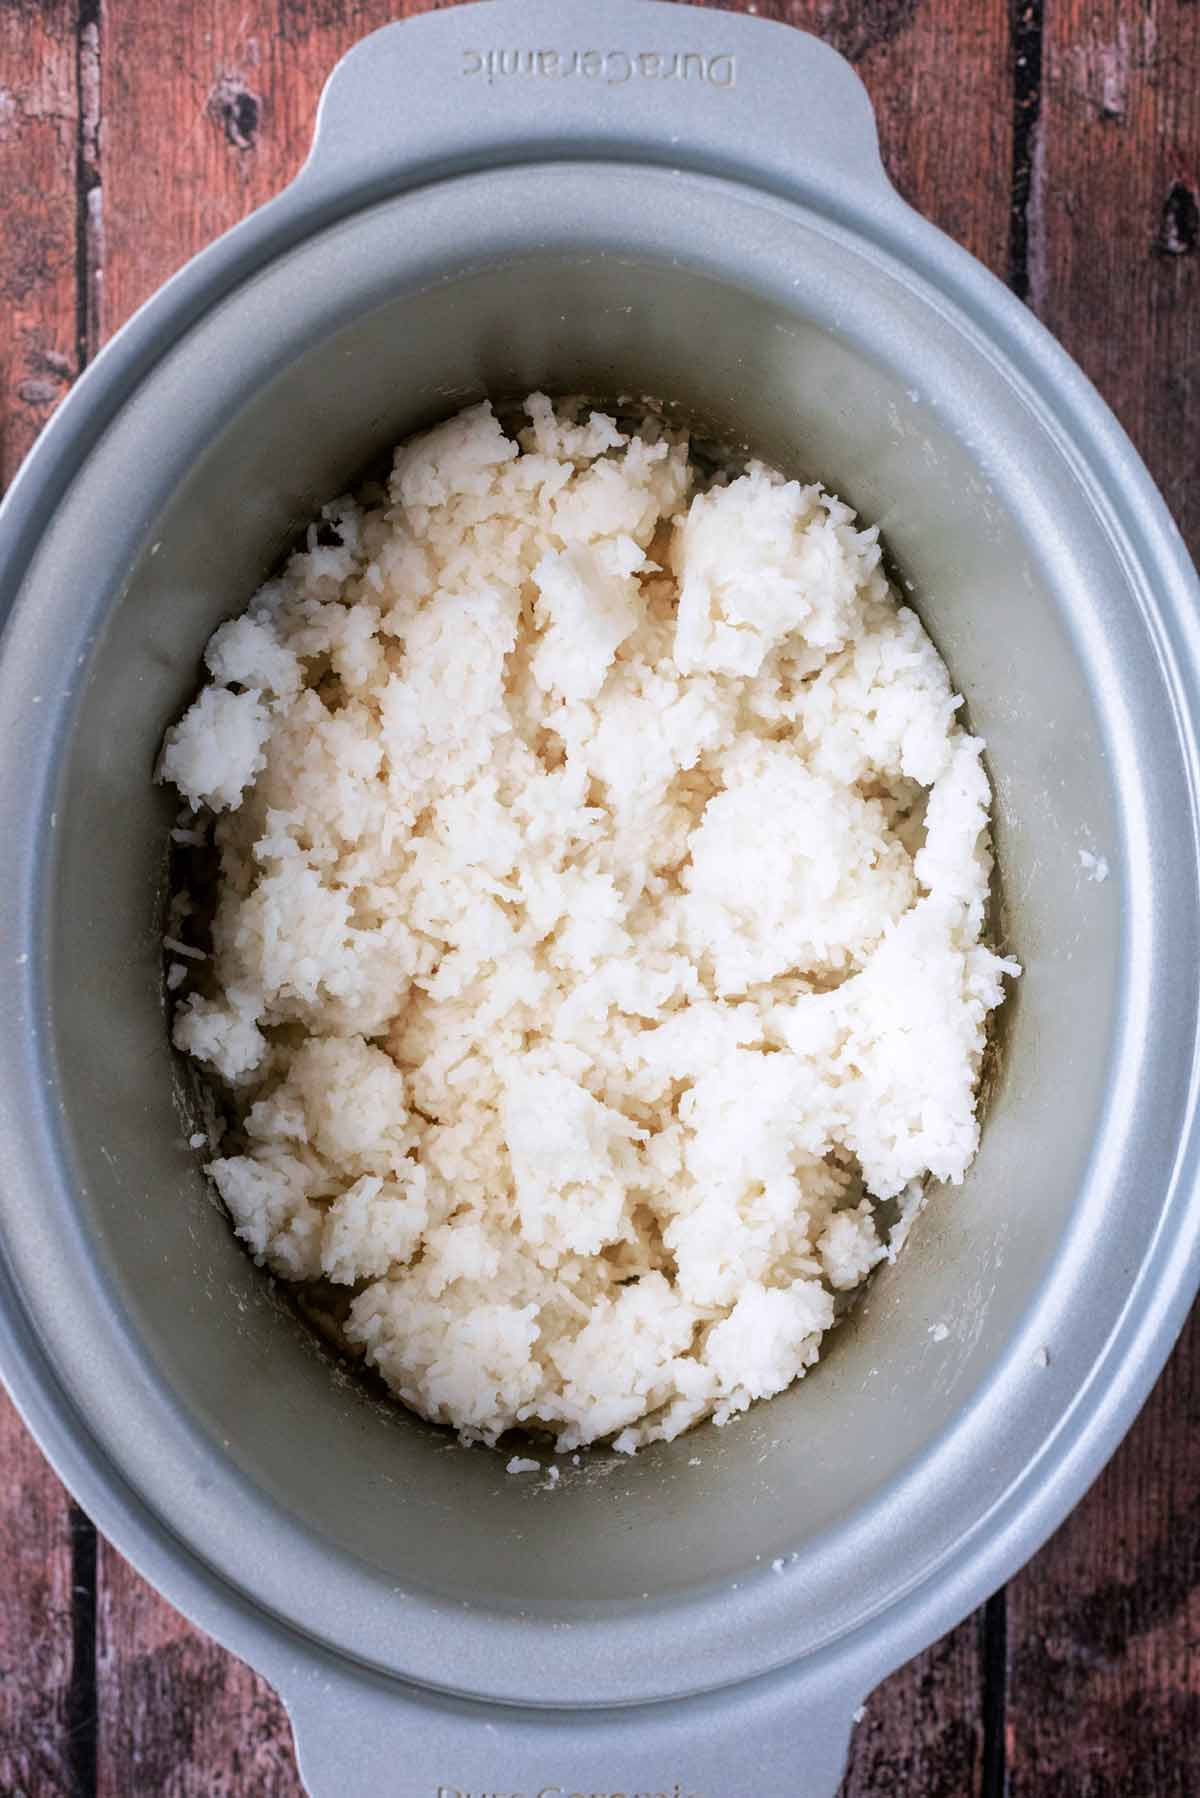 A slow cooker bowl containing cooked white rice.